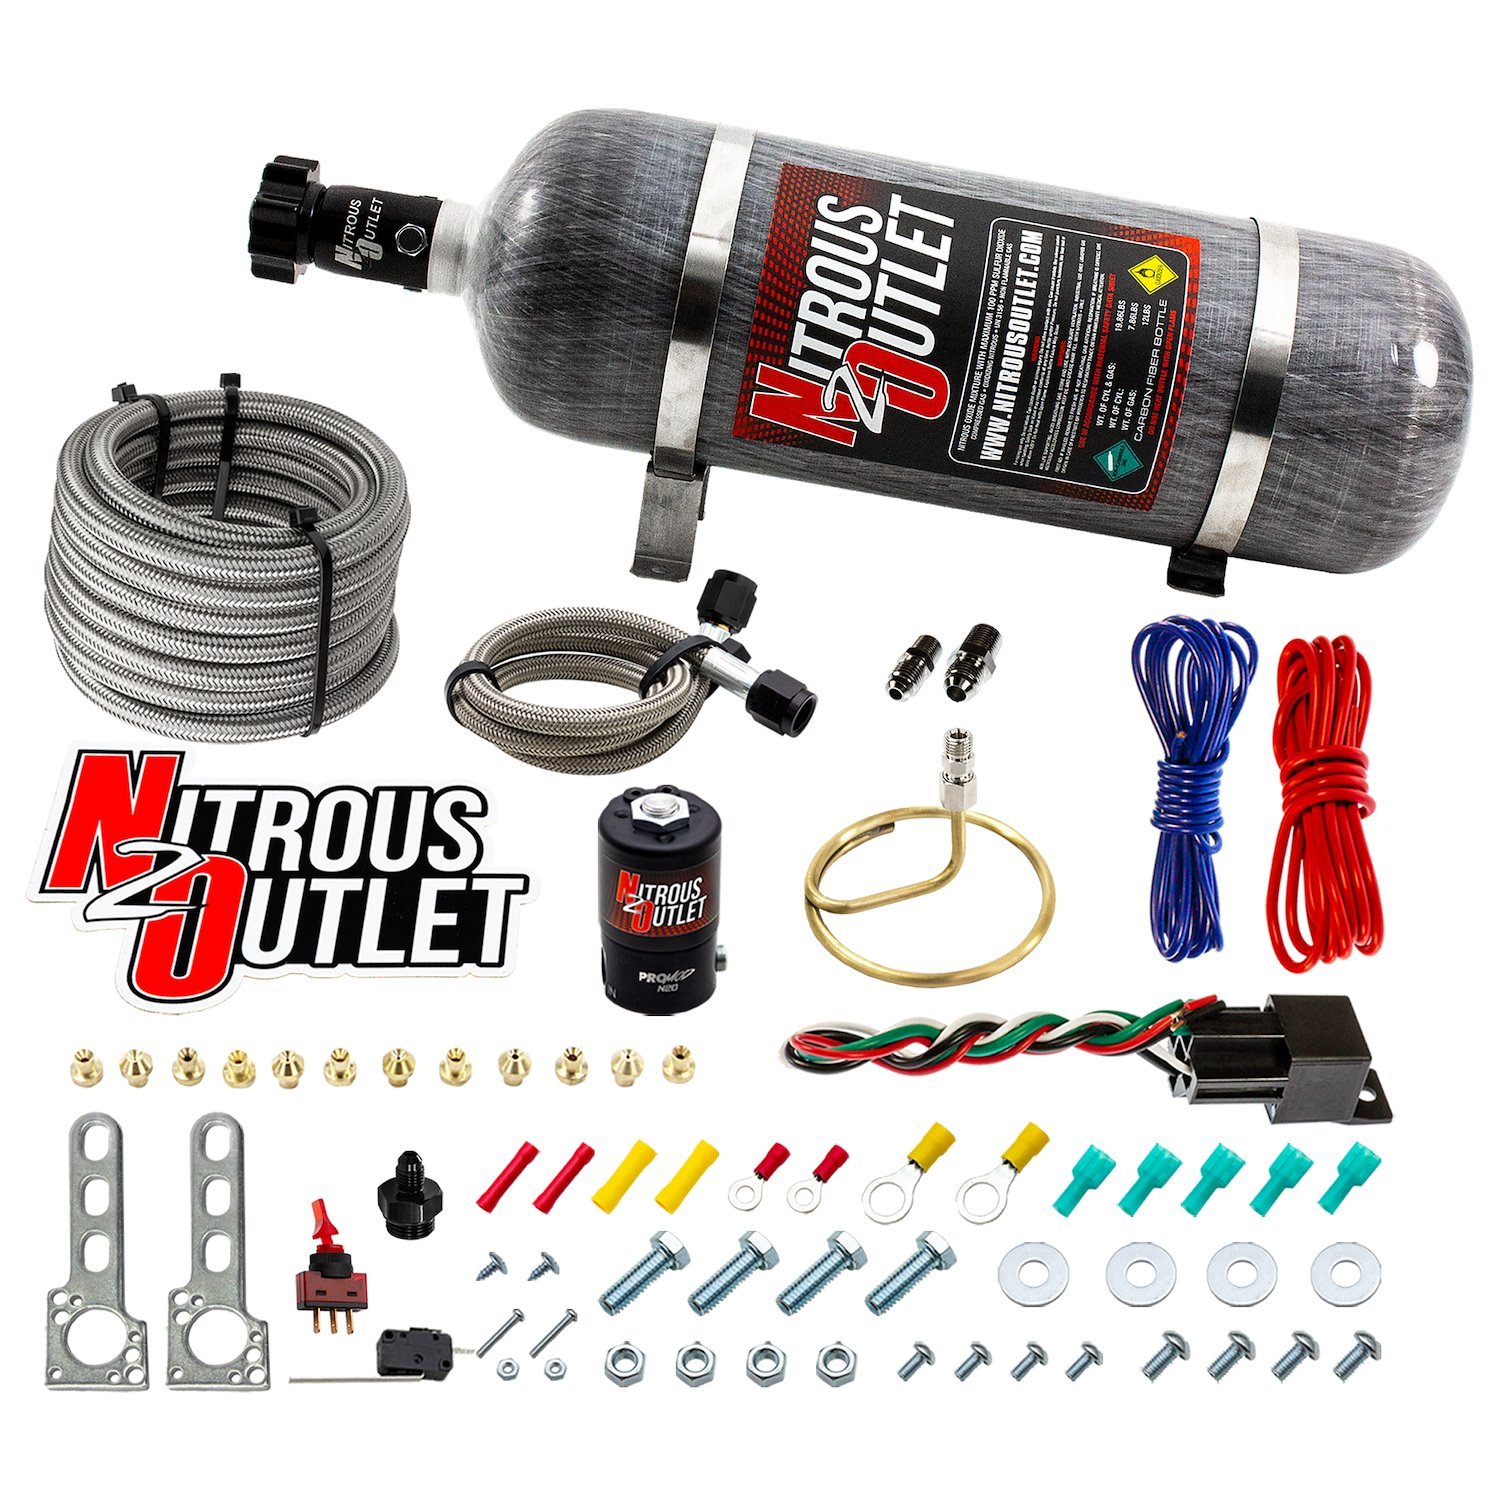 00-10202-12 Universal EFI Dry Small Distribution Ring System, 35-200HP, 12lb Bottle